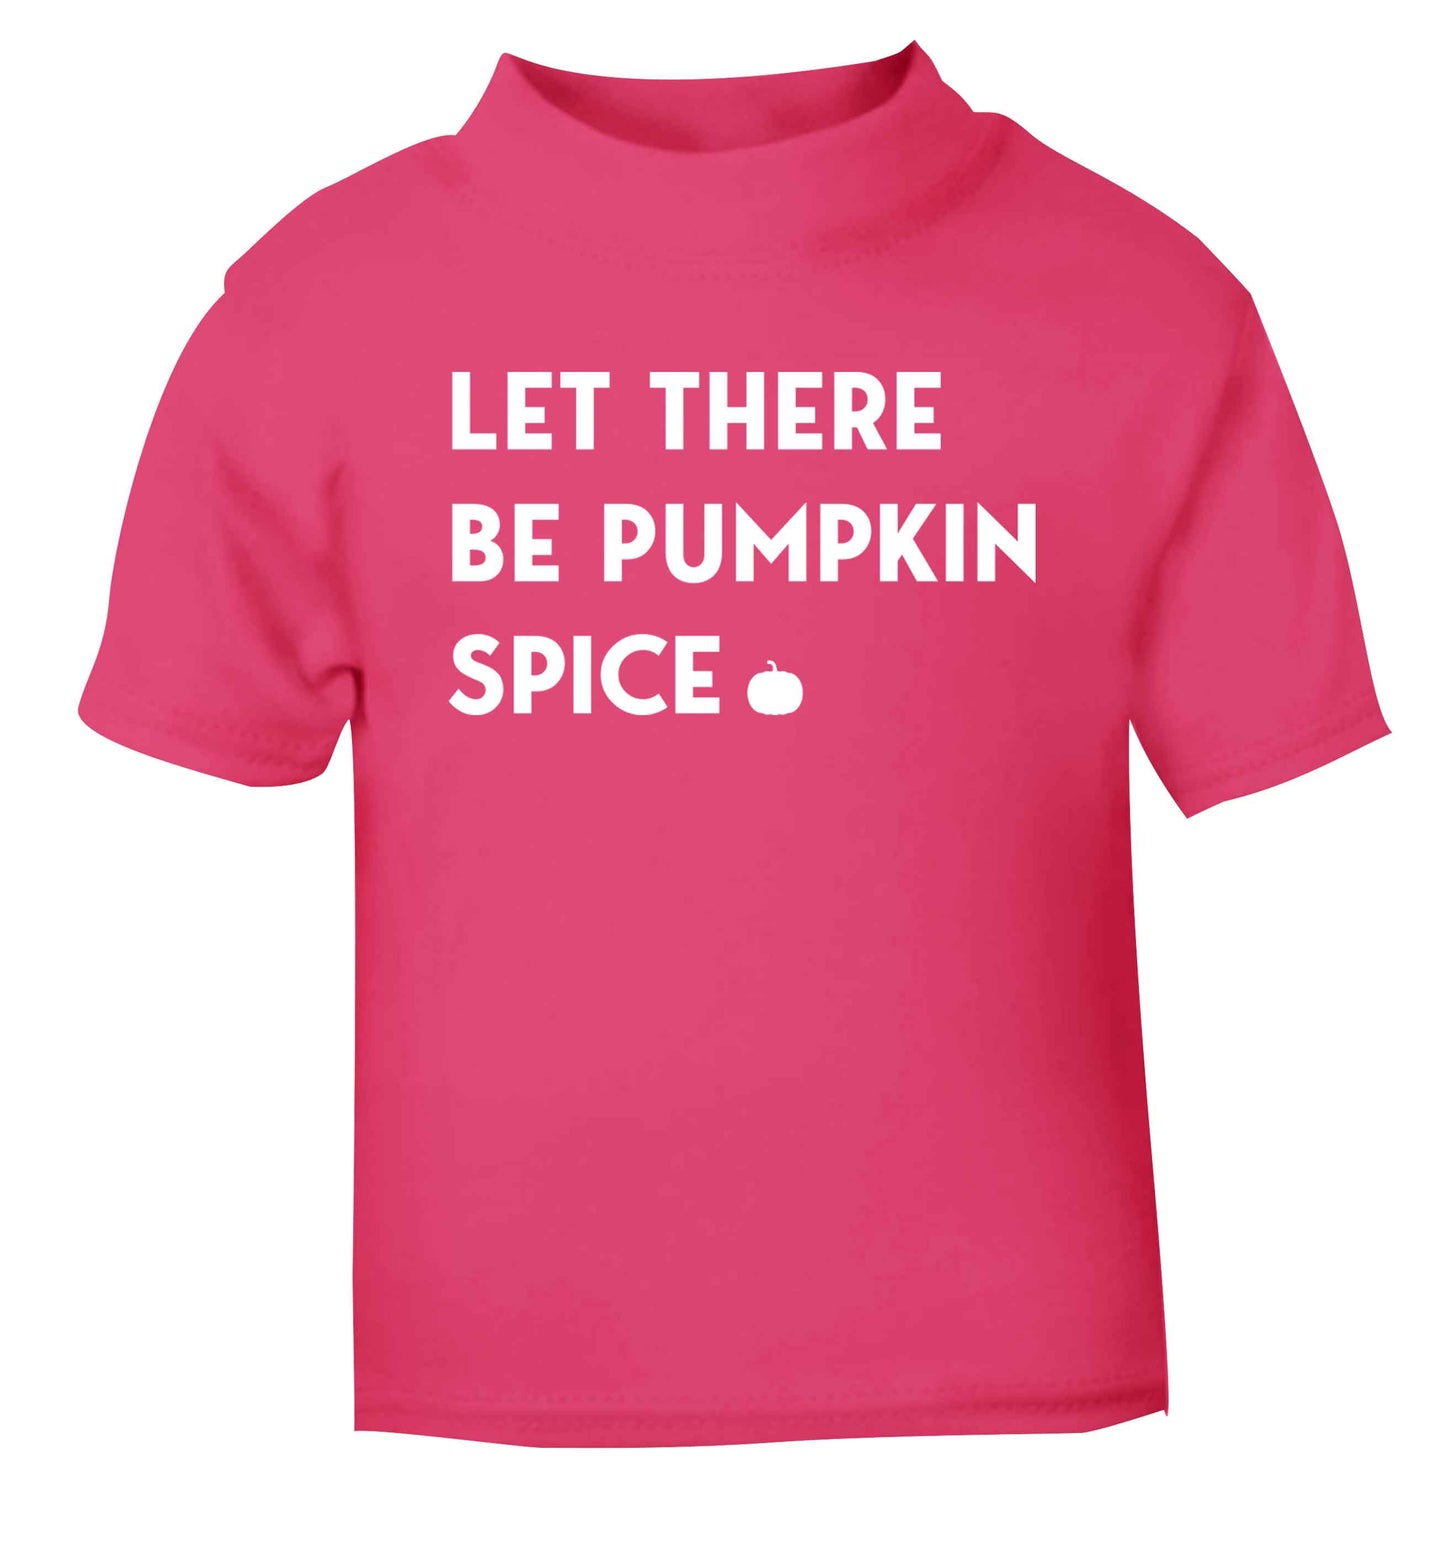 Let Be Pumpkin Spice pink baby toddler Tshirt 2 Years